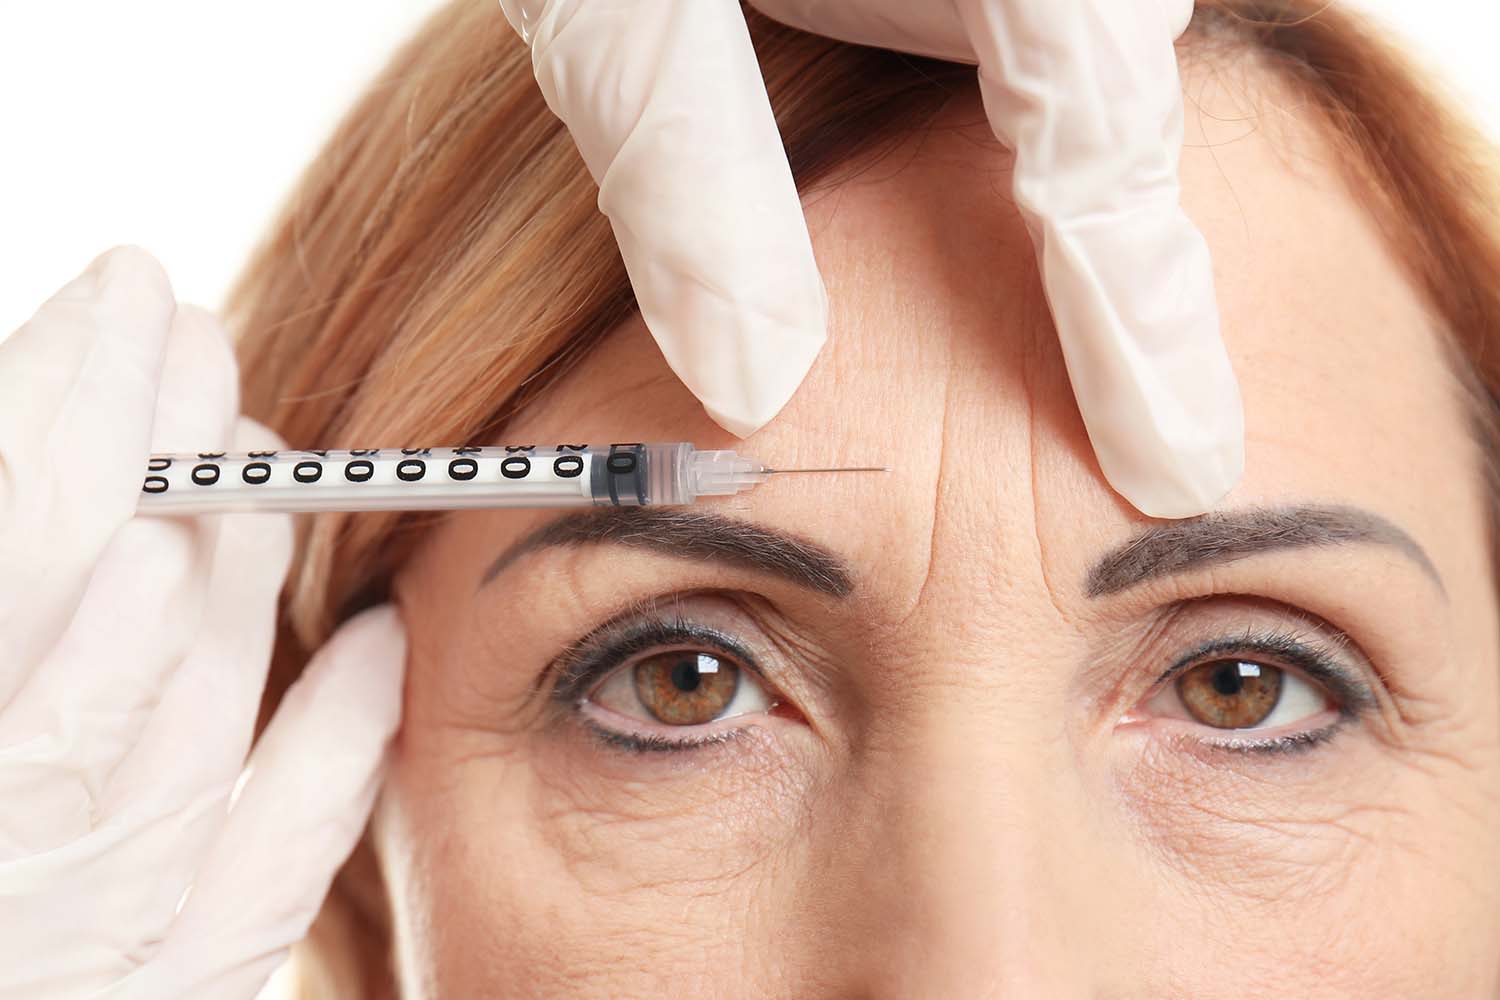 Woman recieving Botox injection in forehead